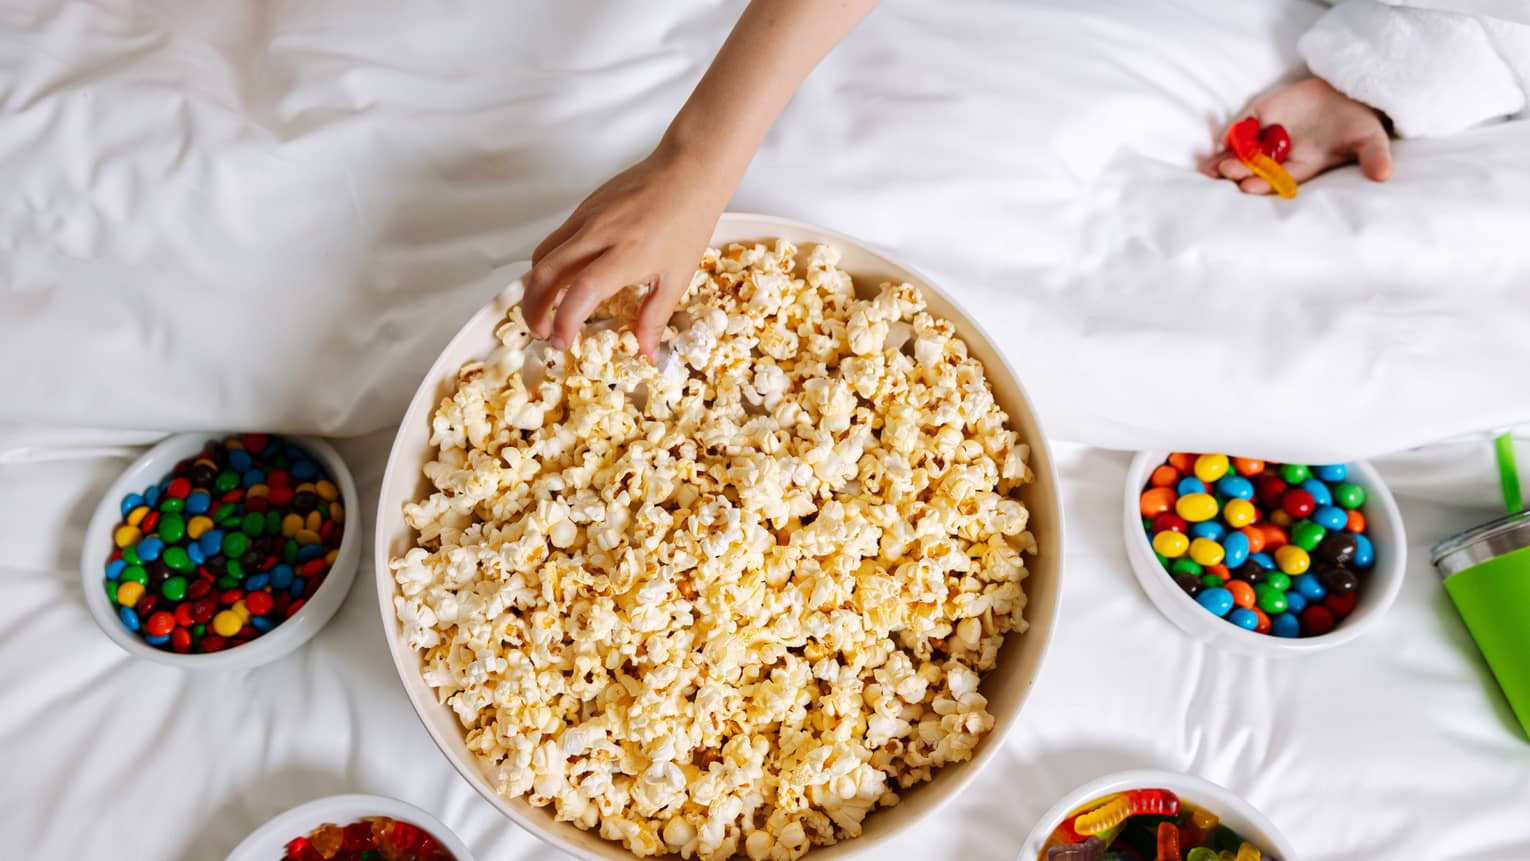 Bowls of popcorn and candy.